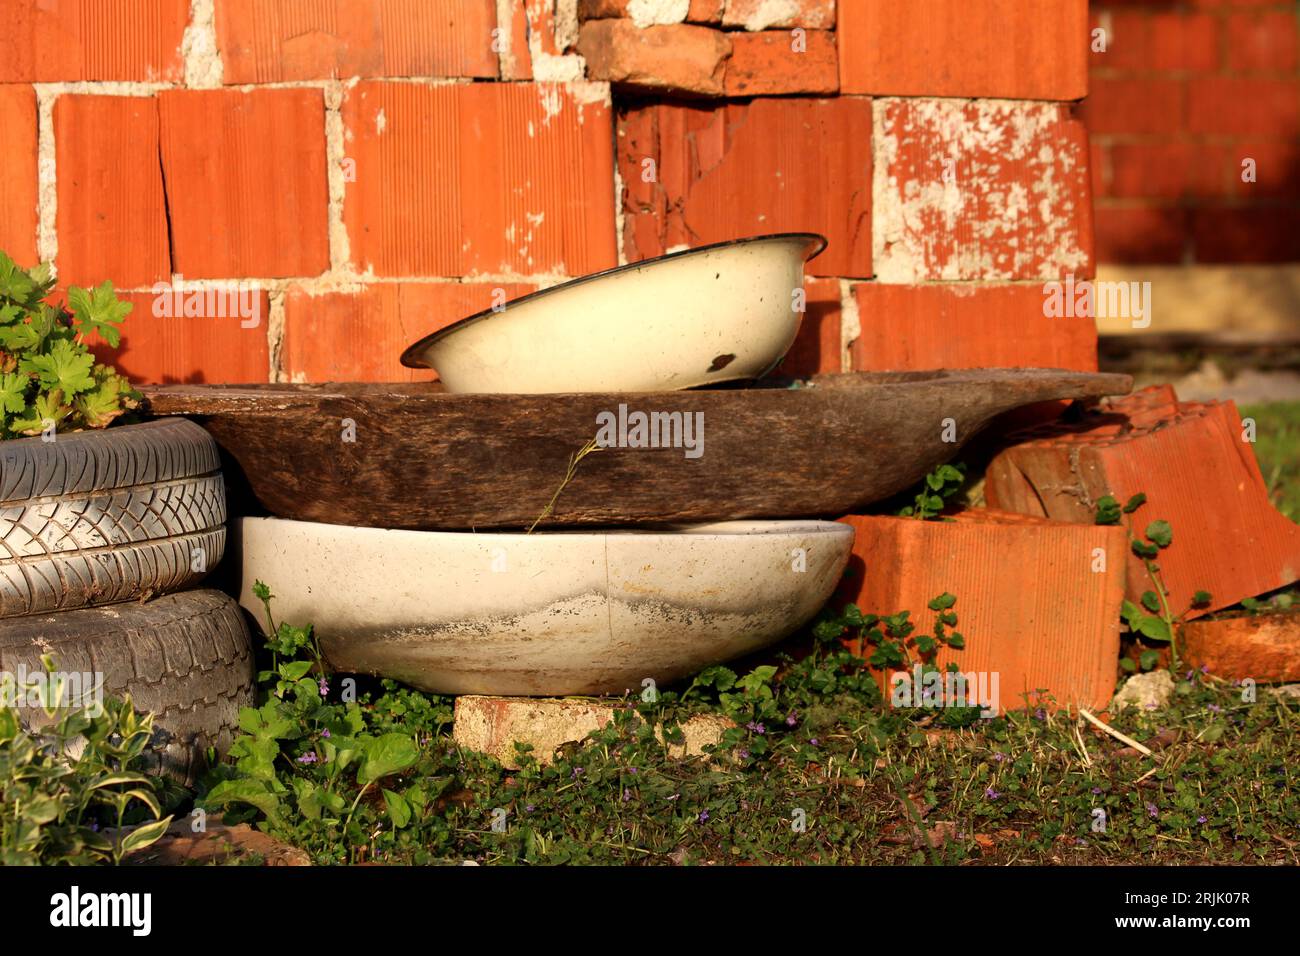 Bunch of old junk in suburban family house backyard next to red building blocks wall consisting of old white partially rusted metallic washbowl on top Stock Photo